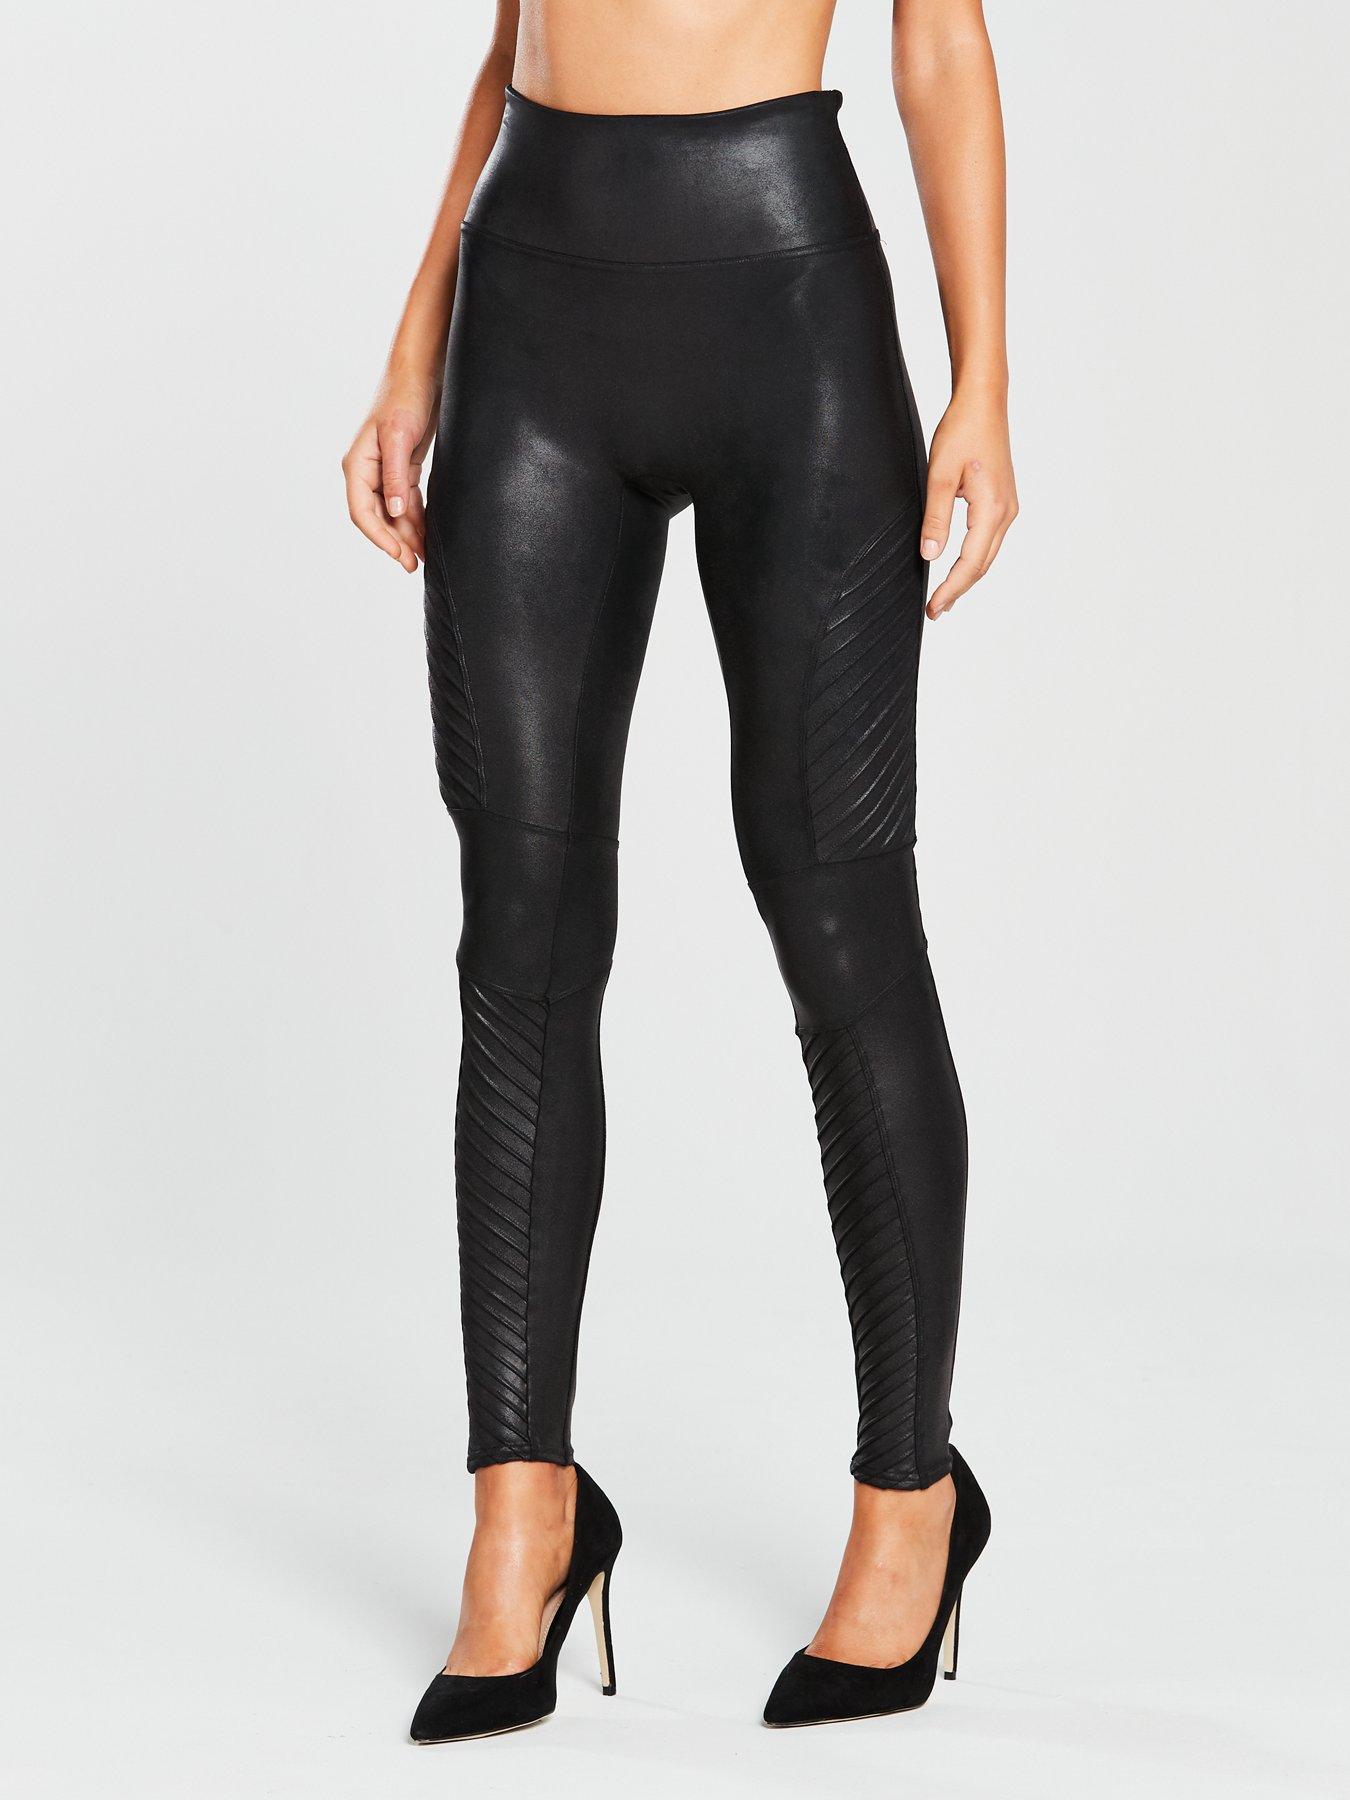 Sexy Black Leather Look Super Skinny Trousers 12 14 Extreme Low